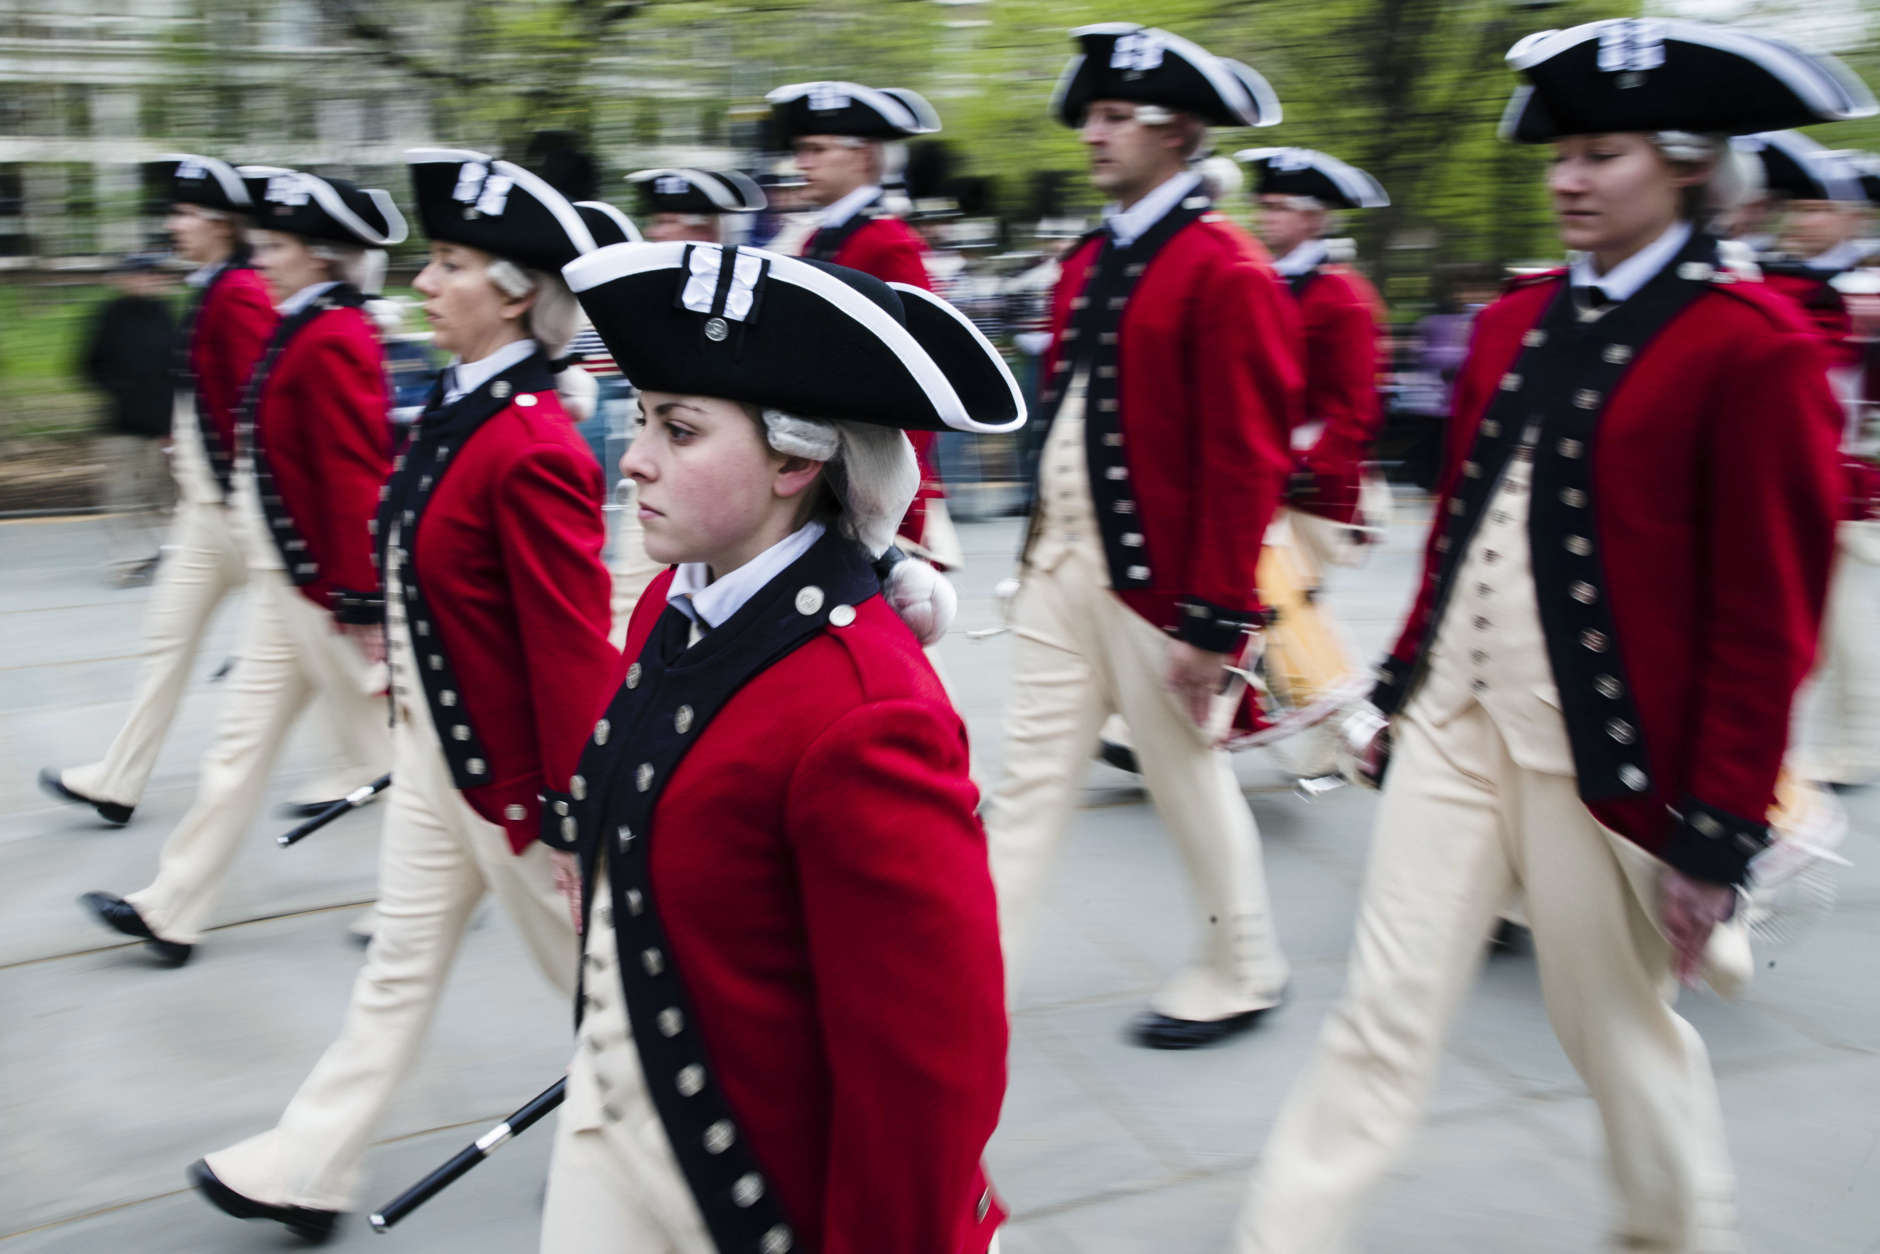 Members of the 3rd U.S. Infantry Regiment Fife and Drum Corp march during opening ceremonies for the Museum of the American Revolution in Philadelphia, Wednesday, April 19, 2017. (AP Photo/Matt Rourke)